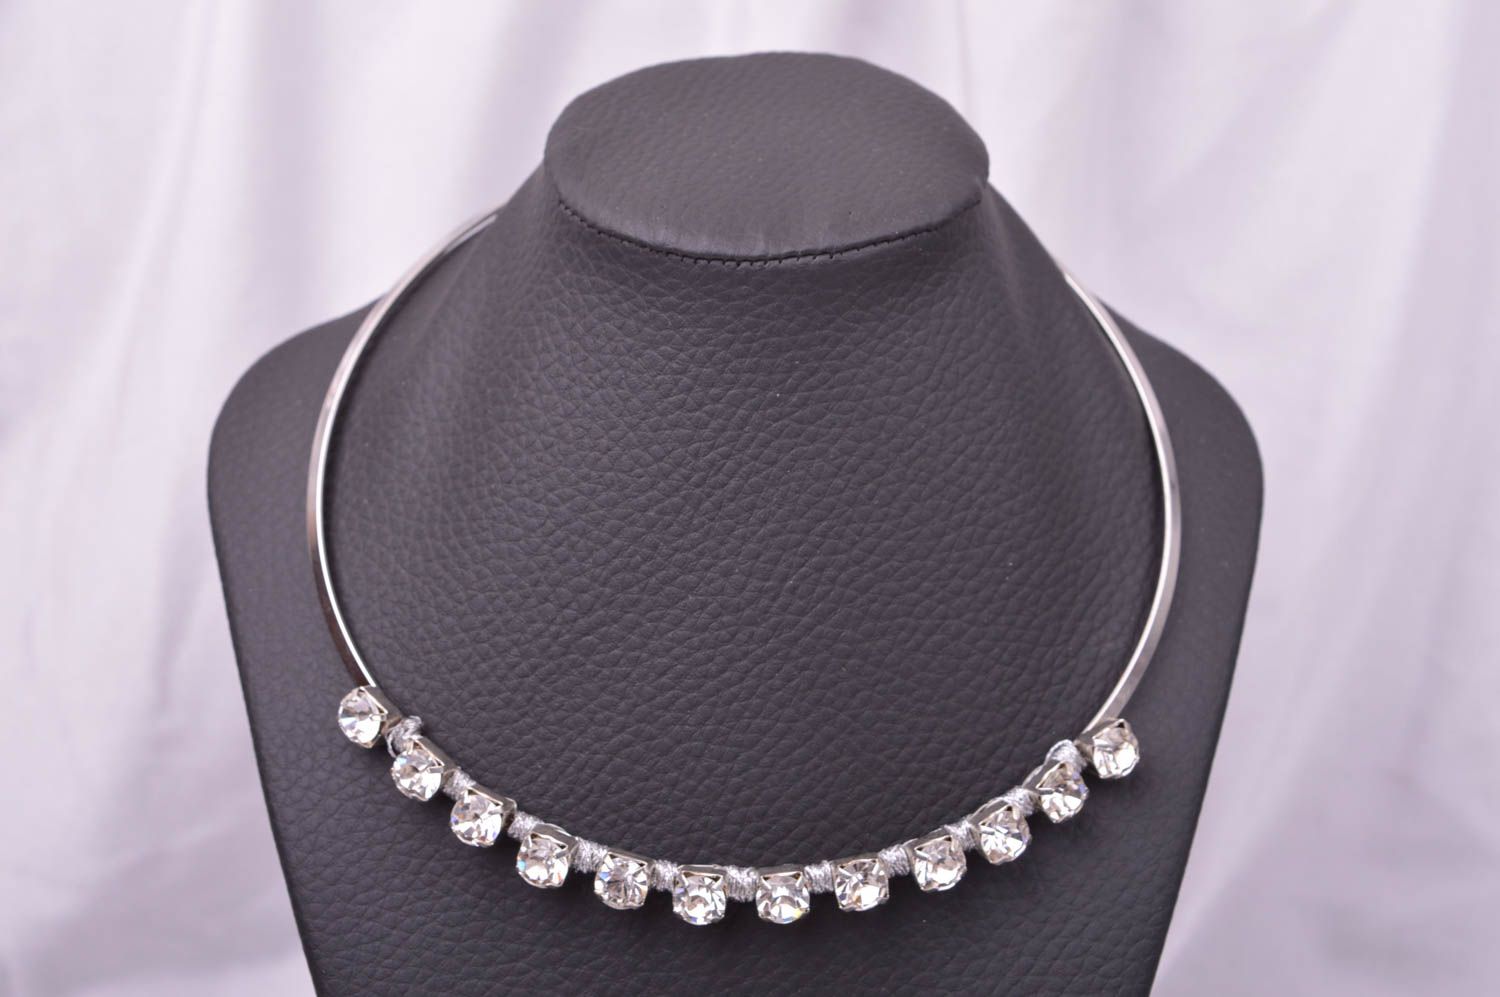 Fancy necklace handmade necklace with rhinestones unusual gifts for women photo 1